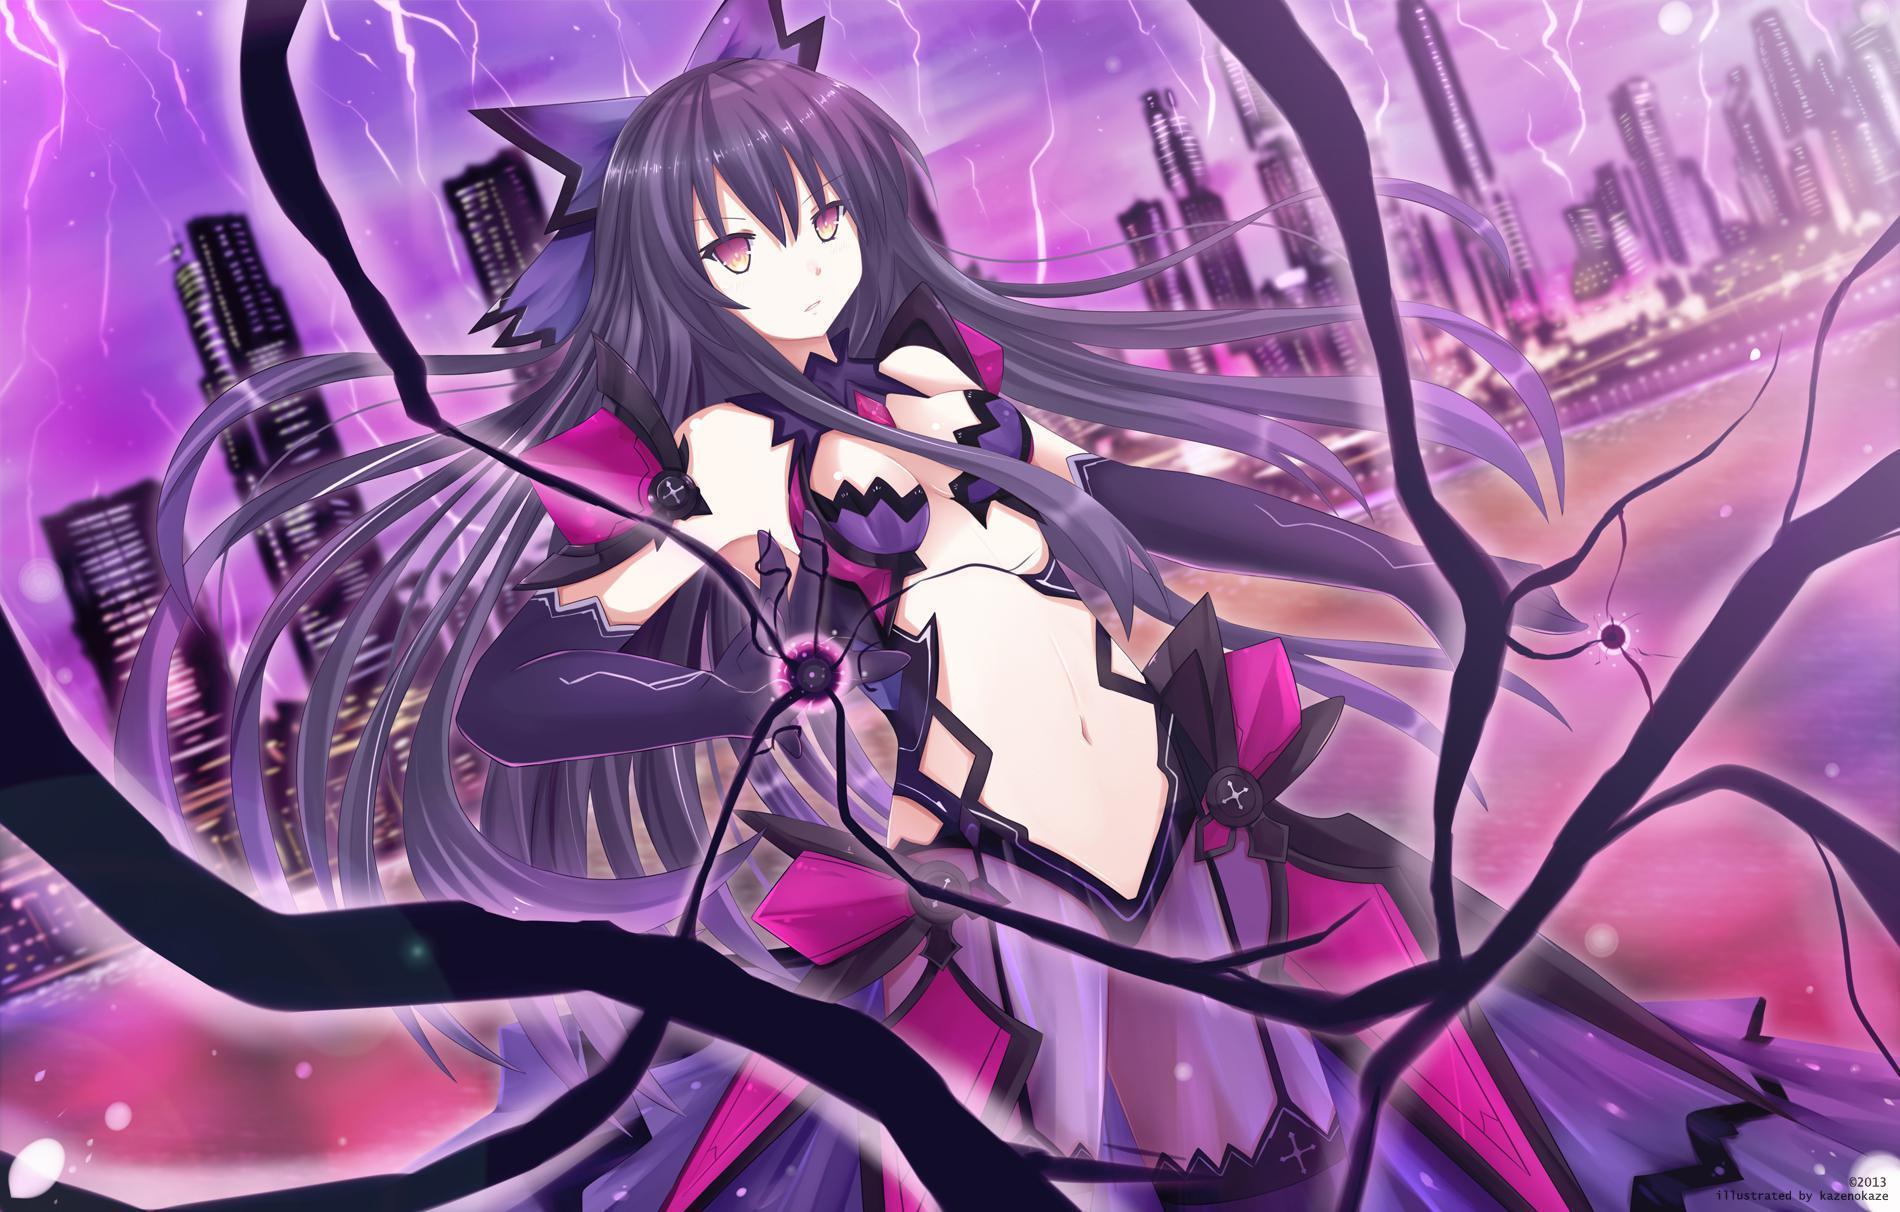 Date a live and Dates